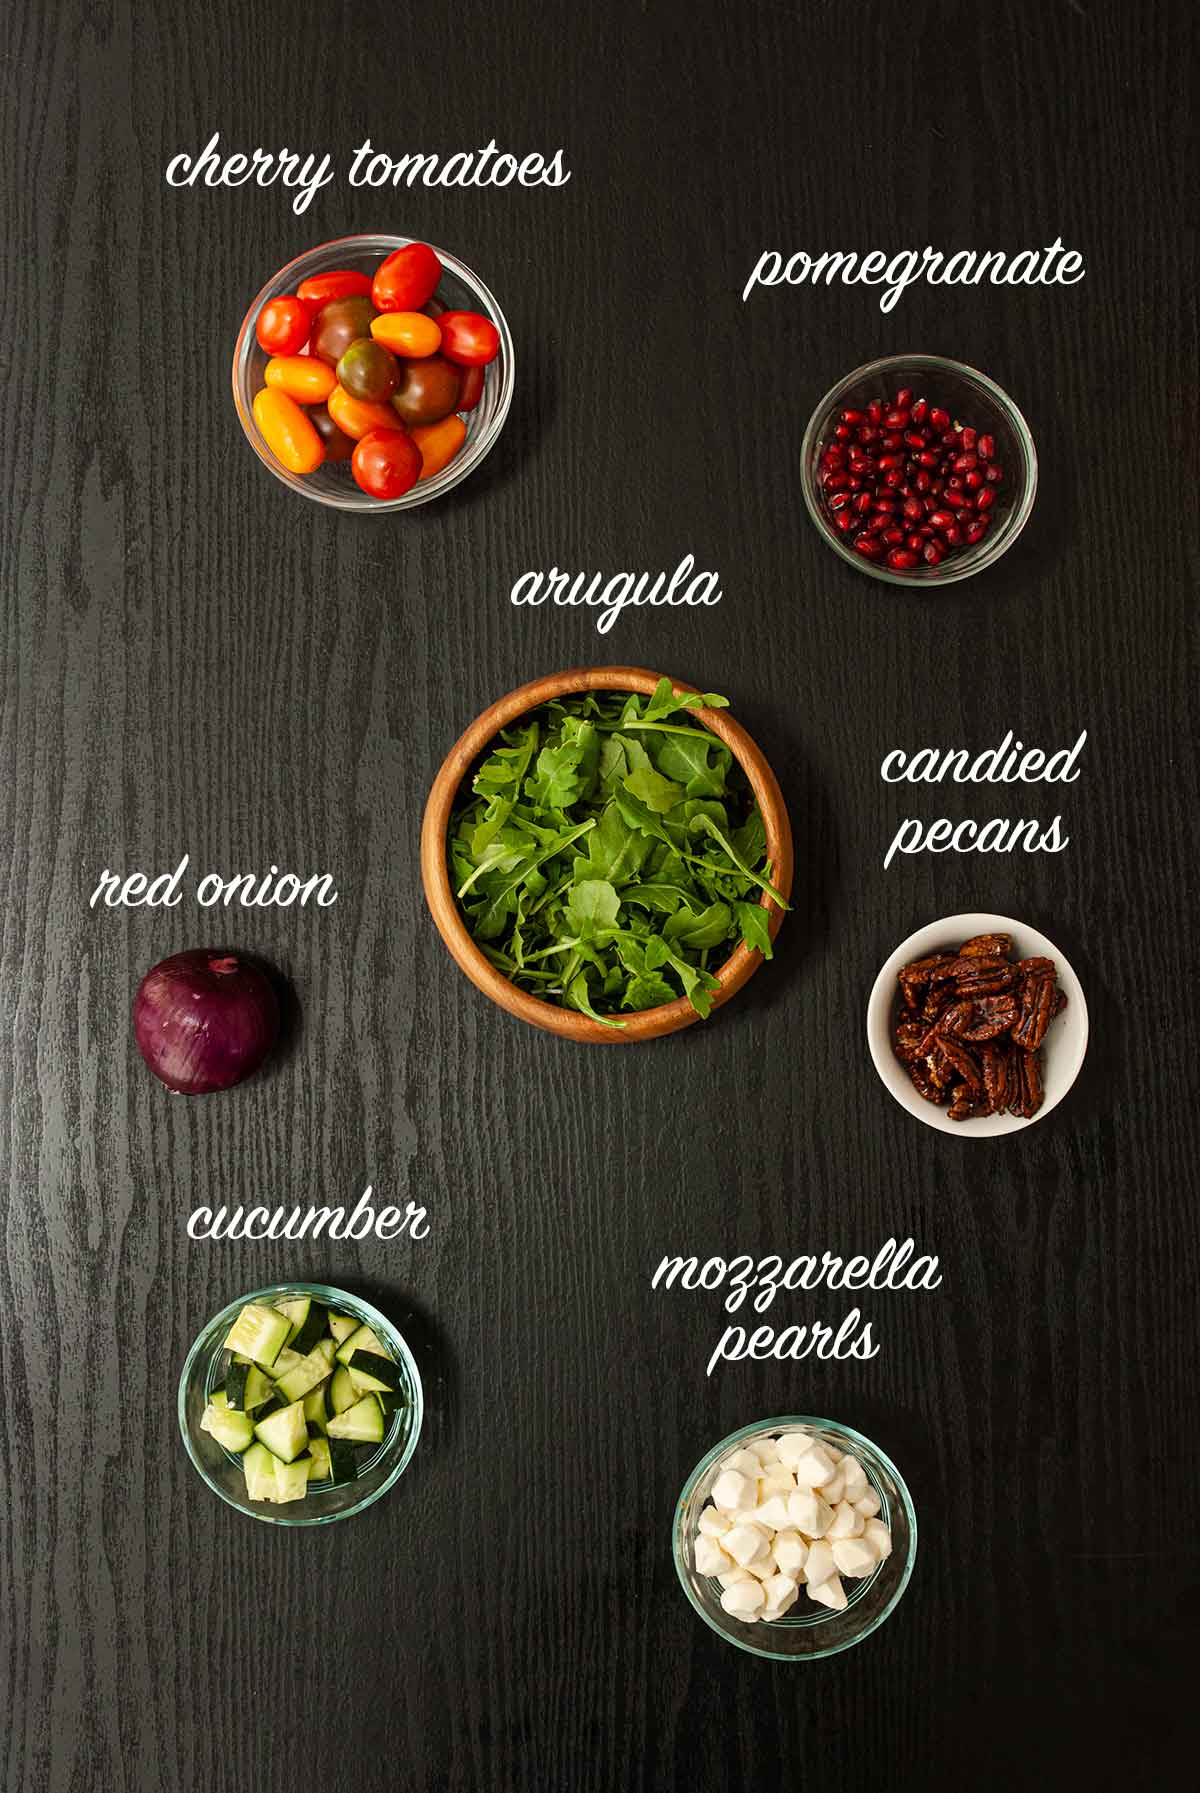 7 ingredients for making christmas salad on a table with labels describing what they are.